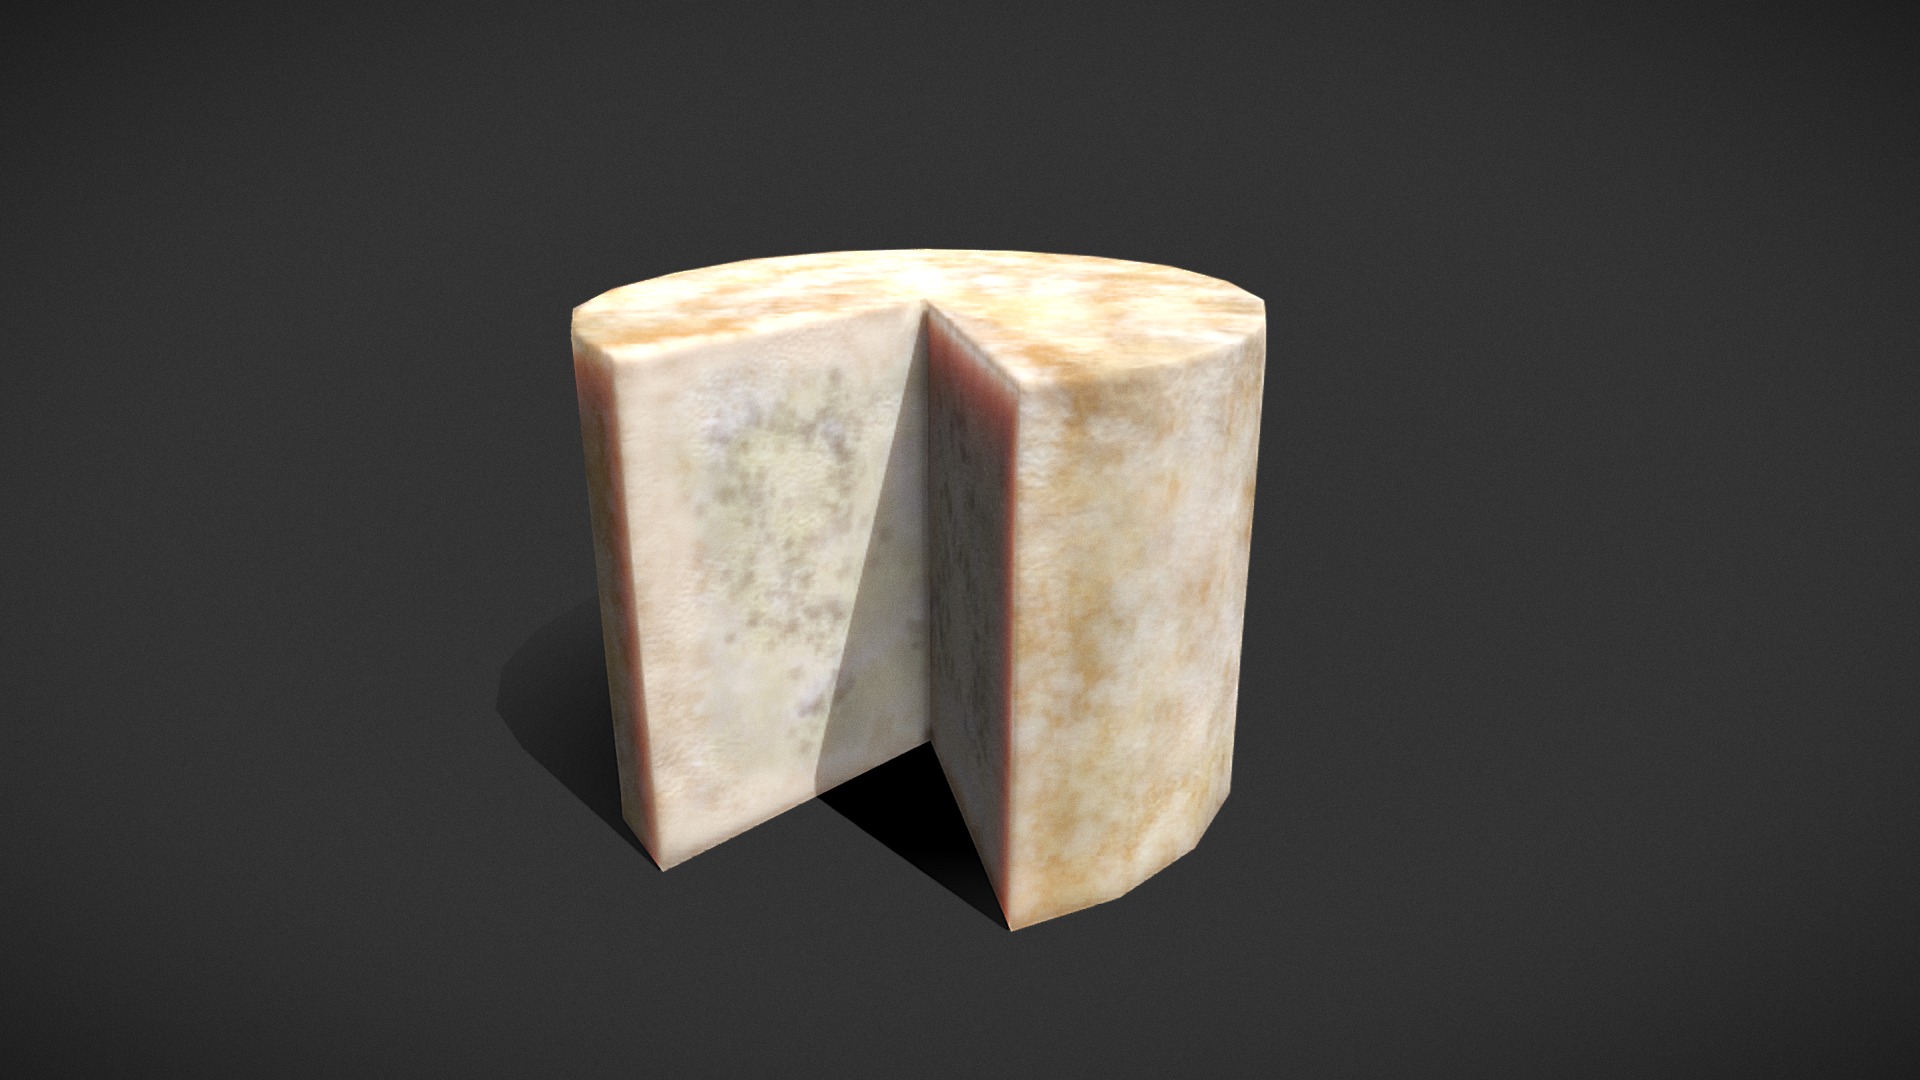 3D model Aged Cheese FBX - This is a 3D model of the Aged Cheese FBX. The 3D model is about a roll of toilet paper.